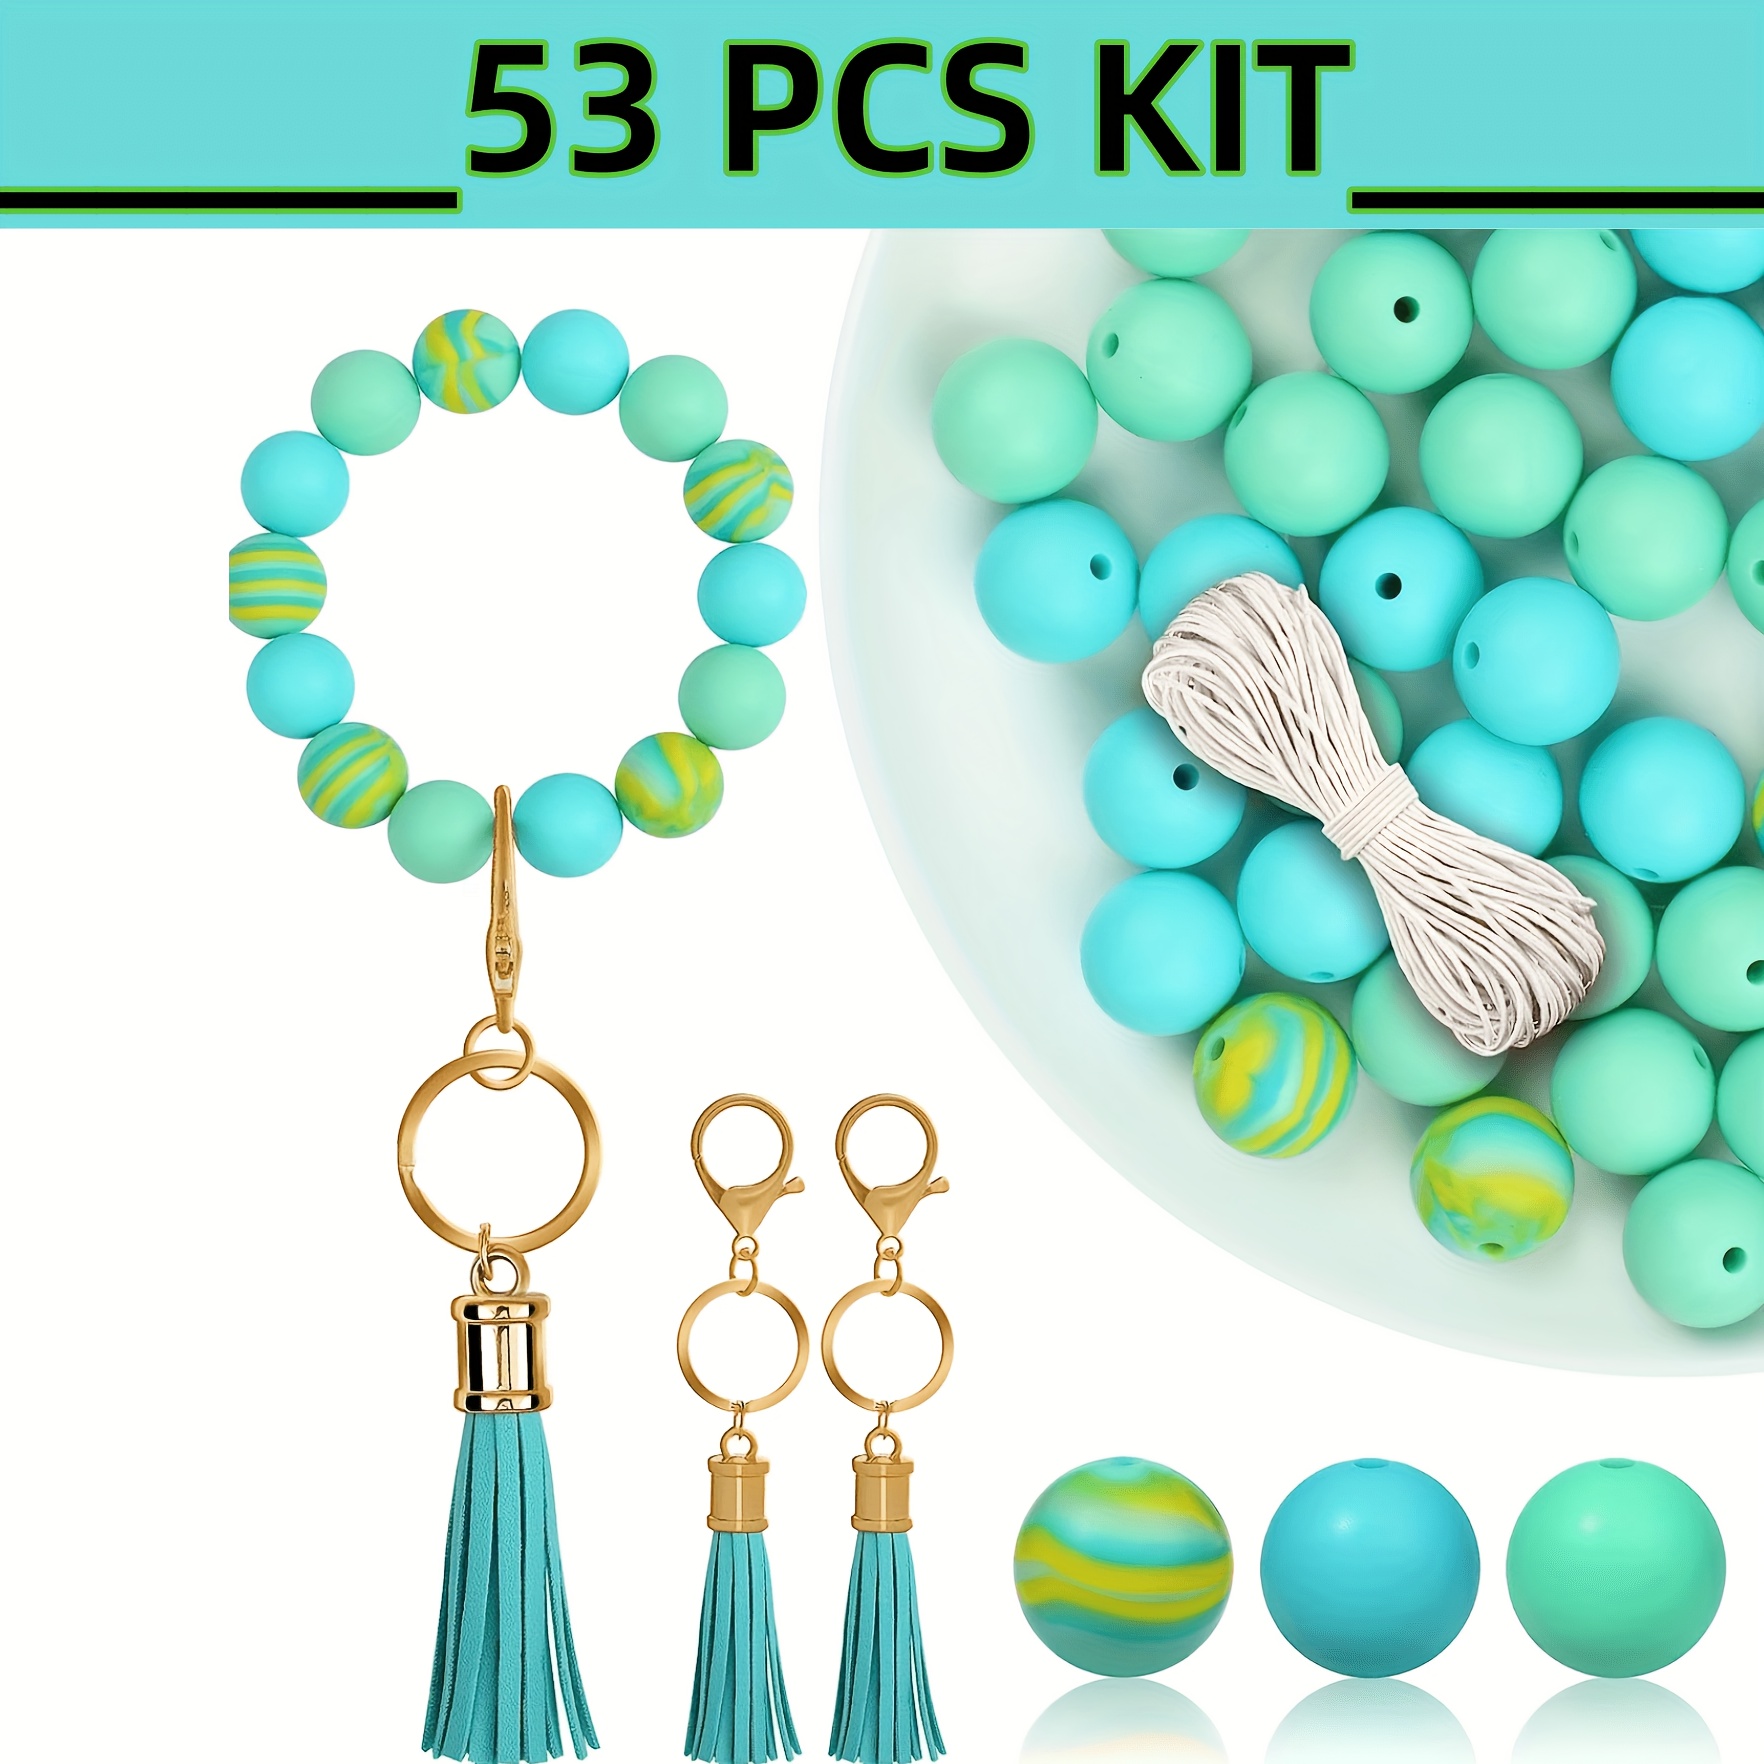 221Pcs Silicone Beads for Keychain Making Kit - 15mm Bulk Silicone Rubber  Key